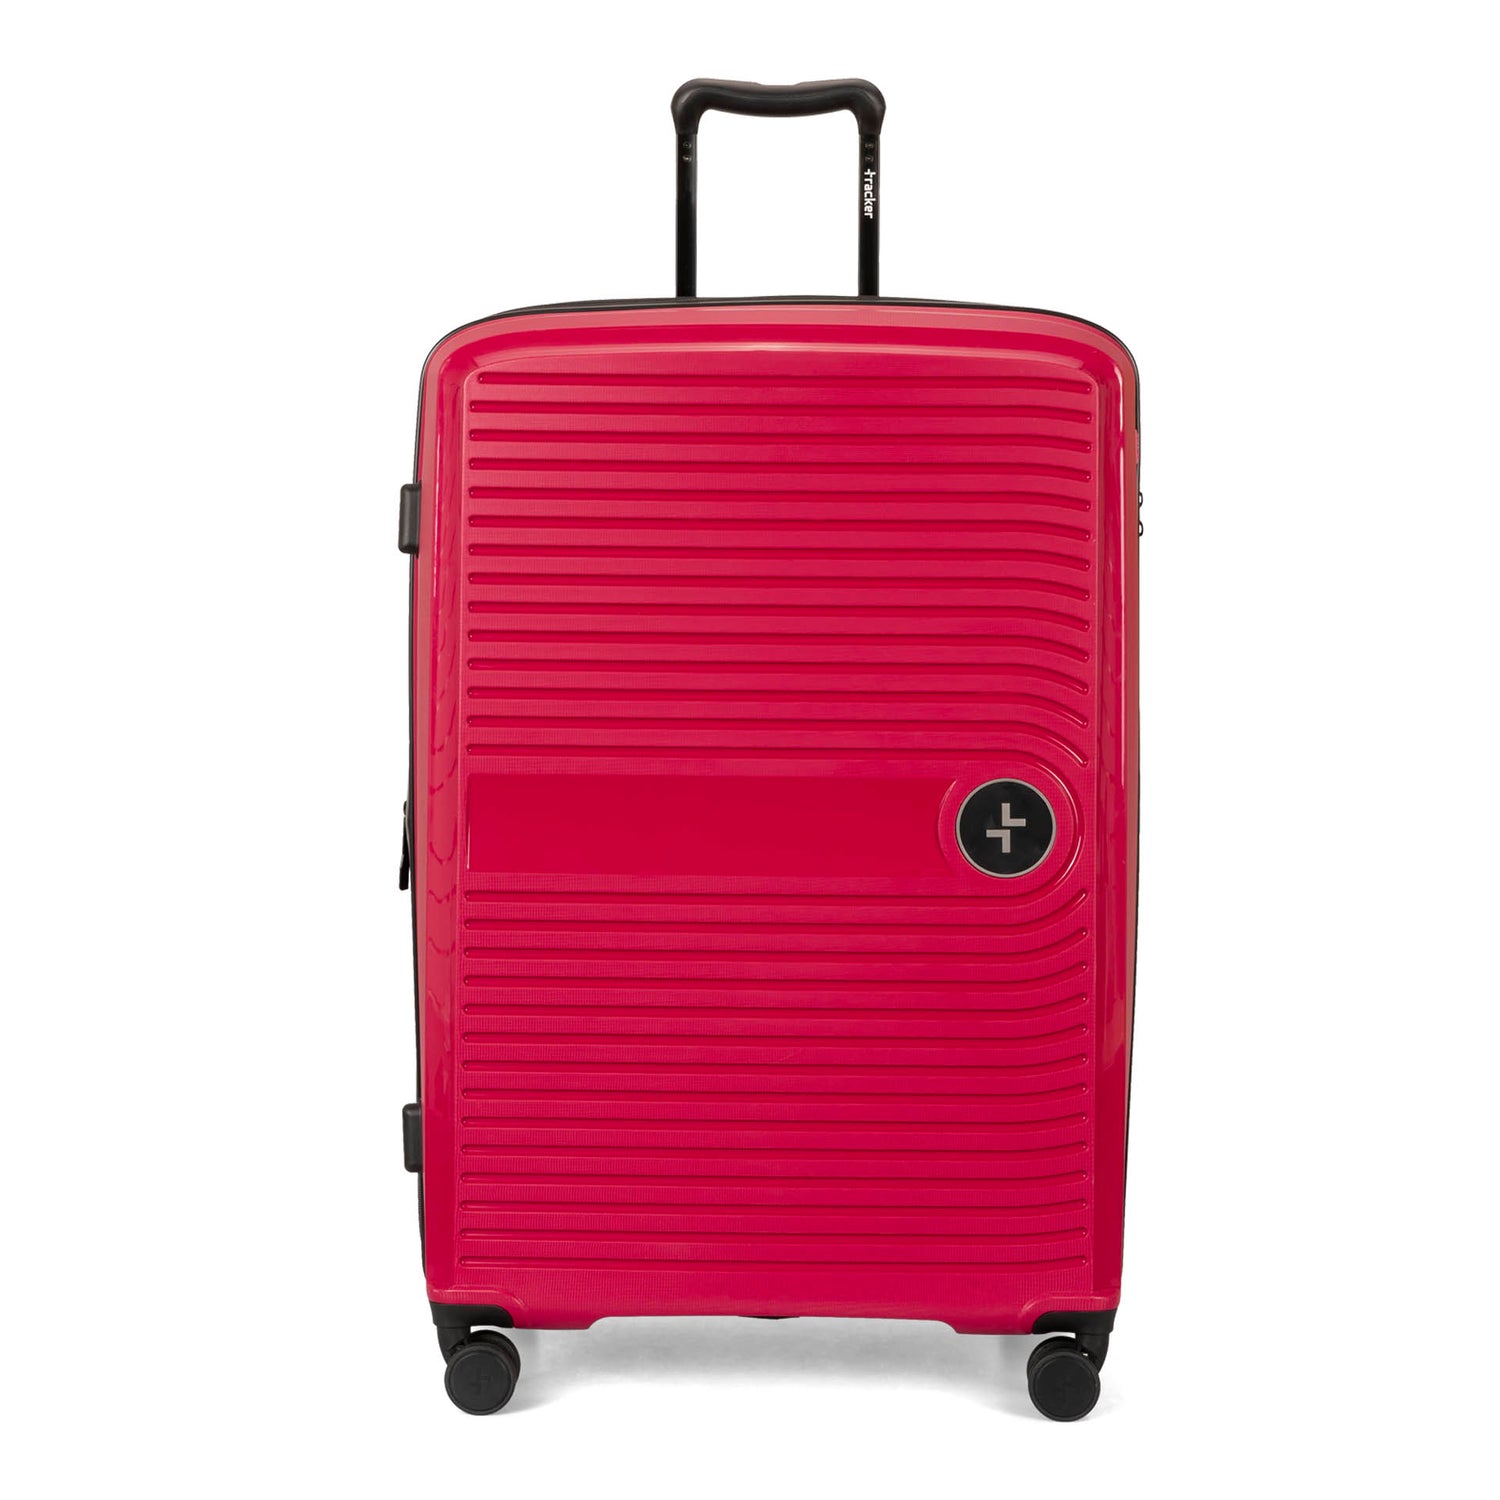 Front side of a red luggage called Dynamo designed by Tracker showing its telescopic handle, lined-pattern shell, and tracker symbol embossed on the front.